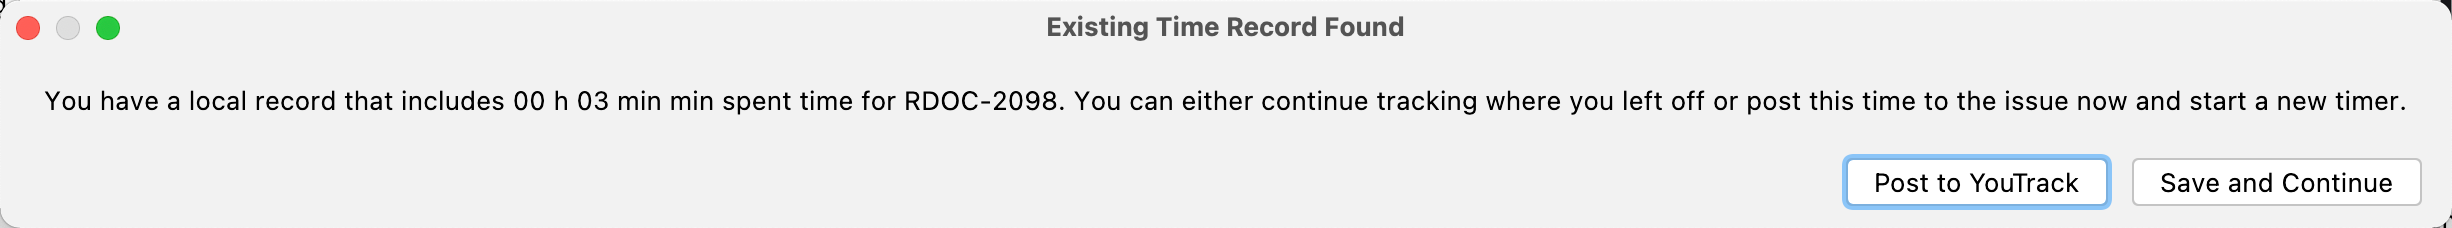 Existing time record found